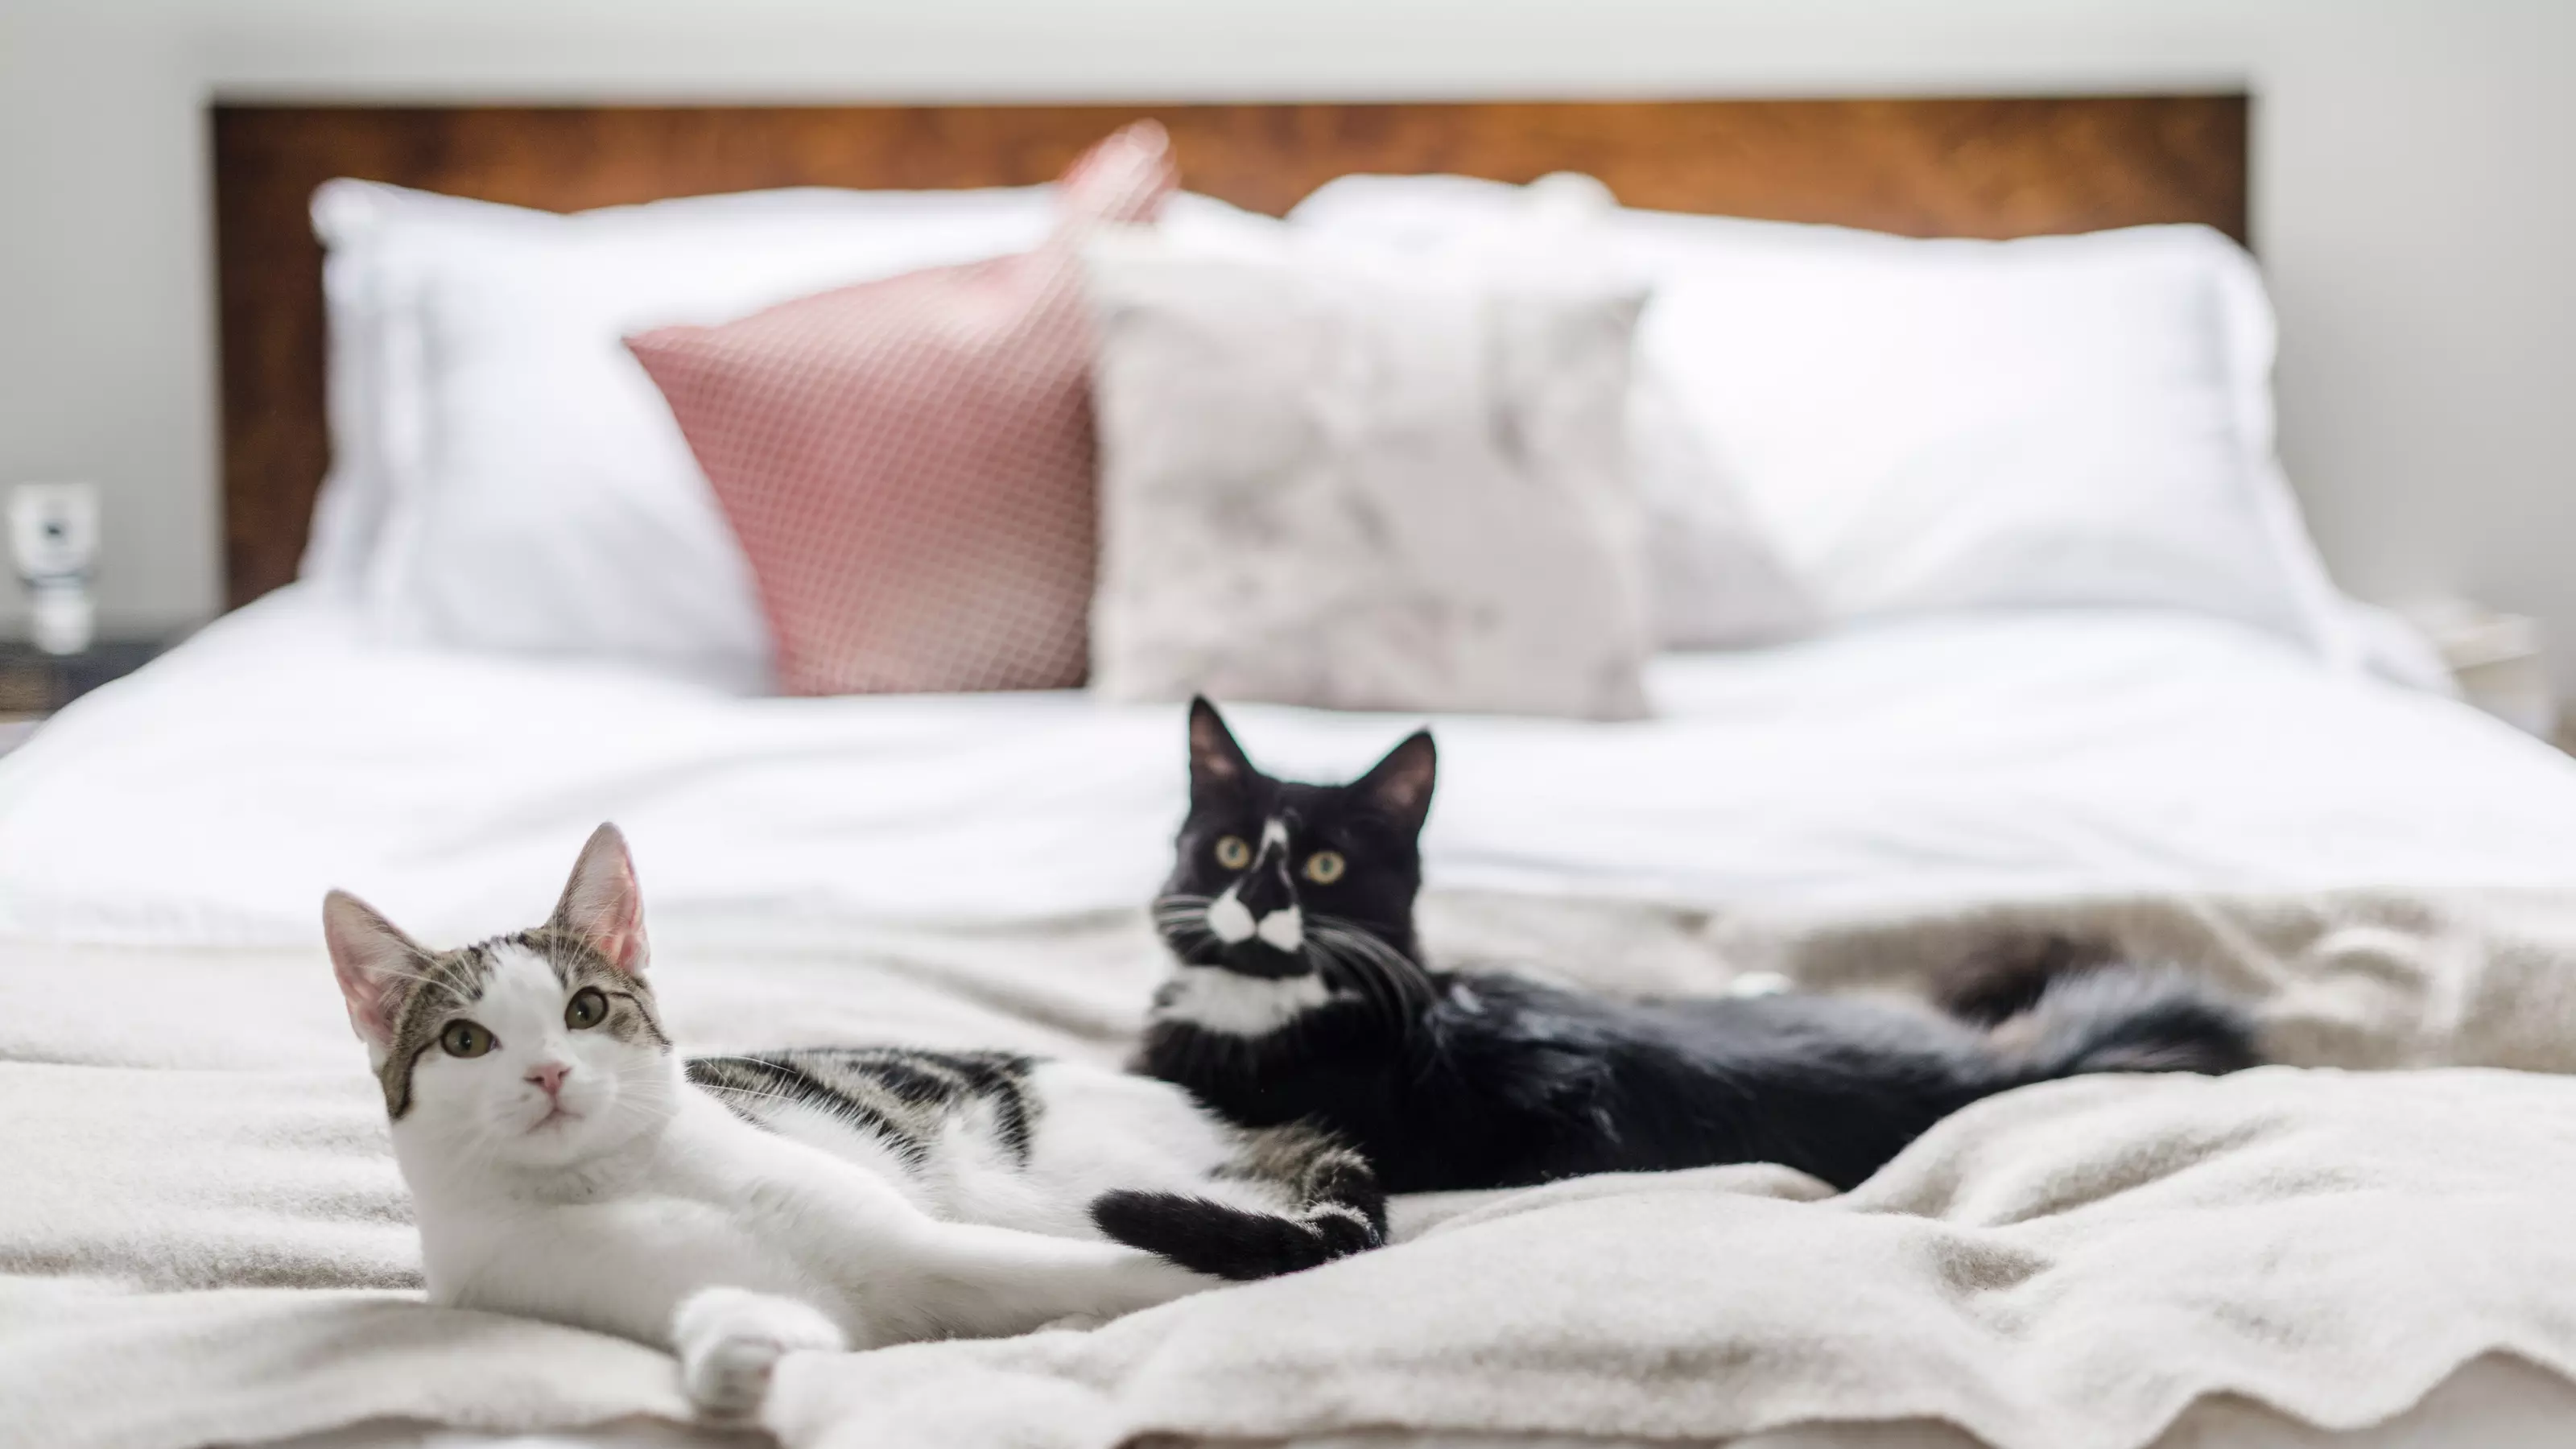 Cats Flo and Ivy snuggle up on a cosy bed in their new home